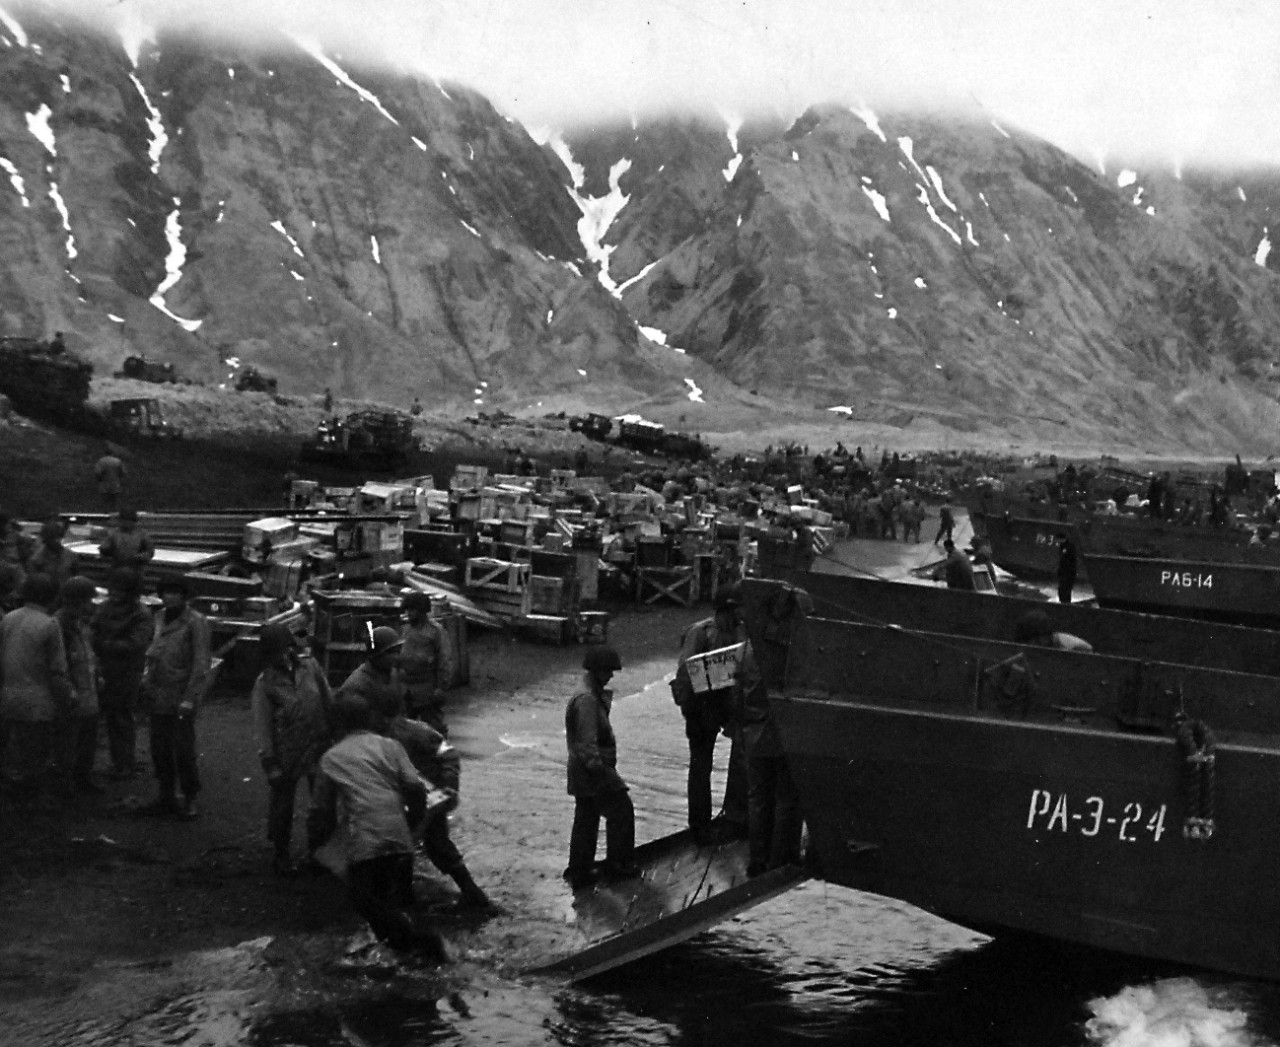 80-G-50921:    Aleutian Islands Campaign, June 1942 - August 1943.  Battle for Attu, May 1943.    Unloading supplies on invasion beachhead, Attu, on the day of the attack.   Photograph released May 14, 1943.    U.S. Navy Photograph, now in the collections of the National Archives.  (2016/05/10).